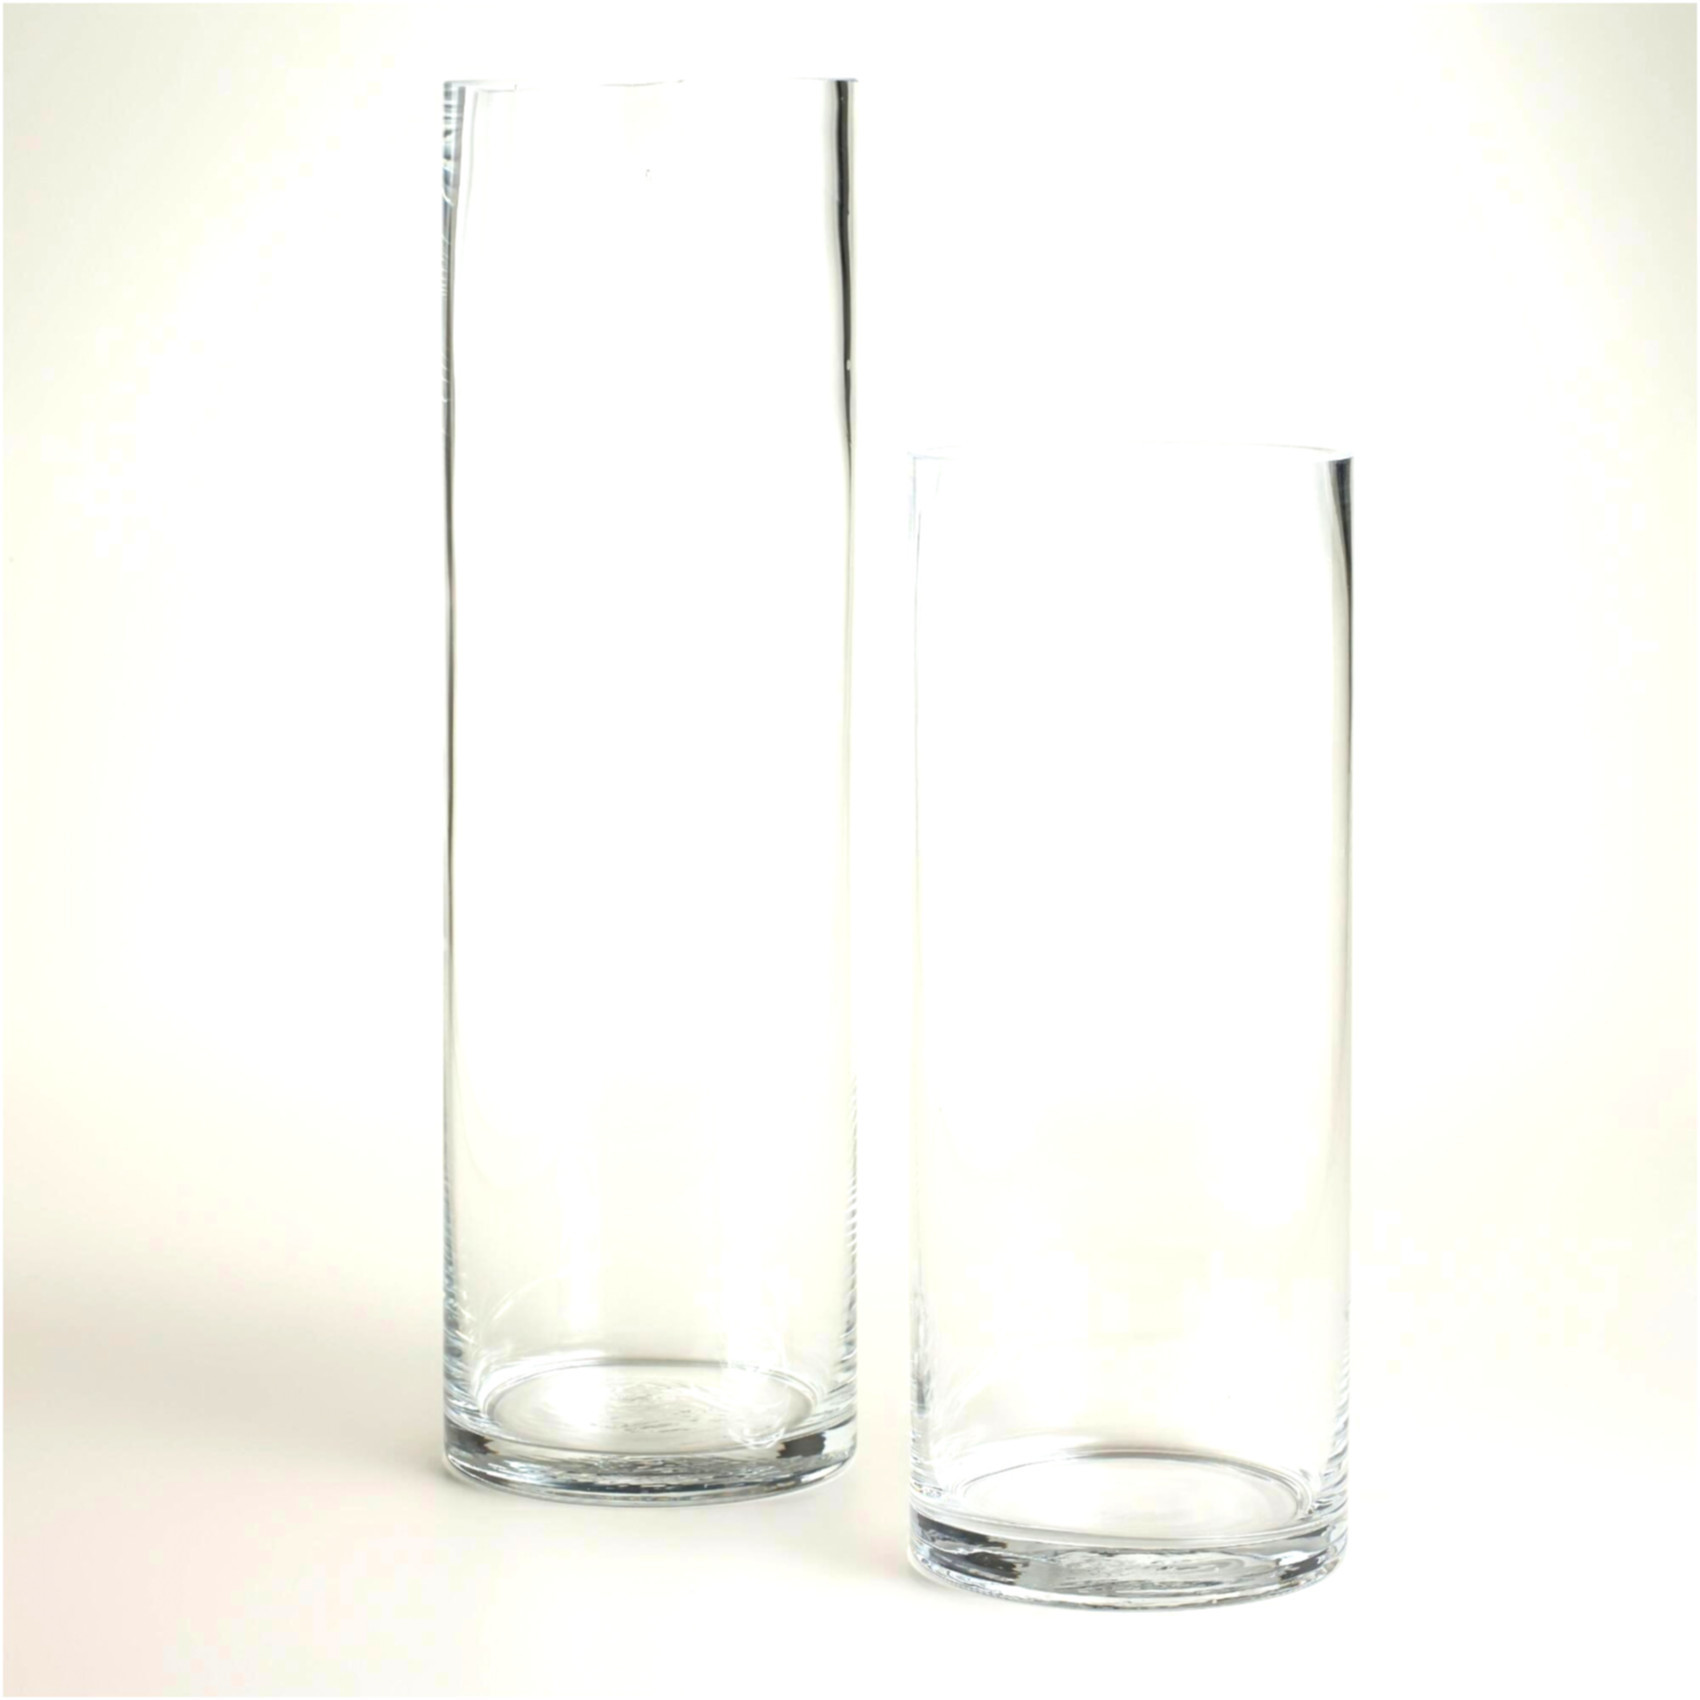 28 Awesome Large Round Clear Glass Vase 2023 free download large round clear glass vase of why you should not go to glass vases wholesale glass vases inside crystal glass vases wholesale inspirational 30 elegant vases with